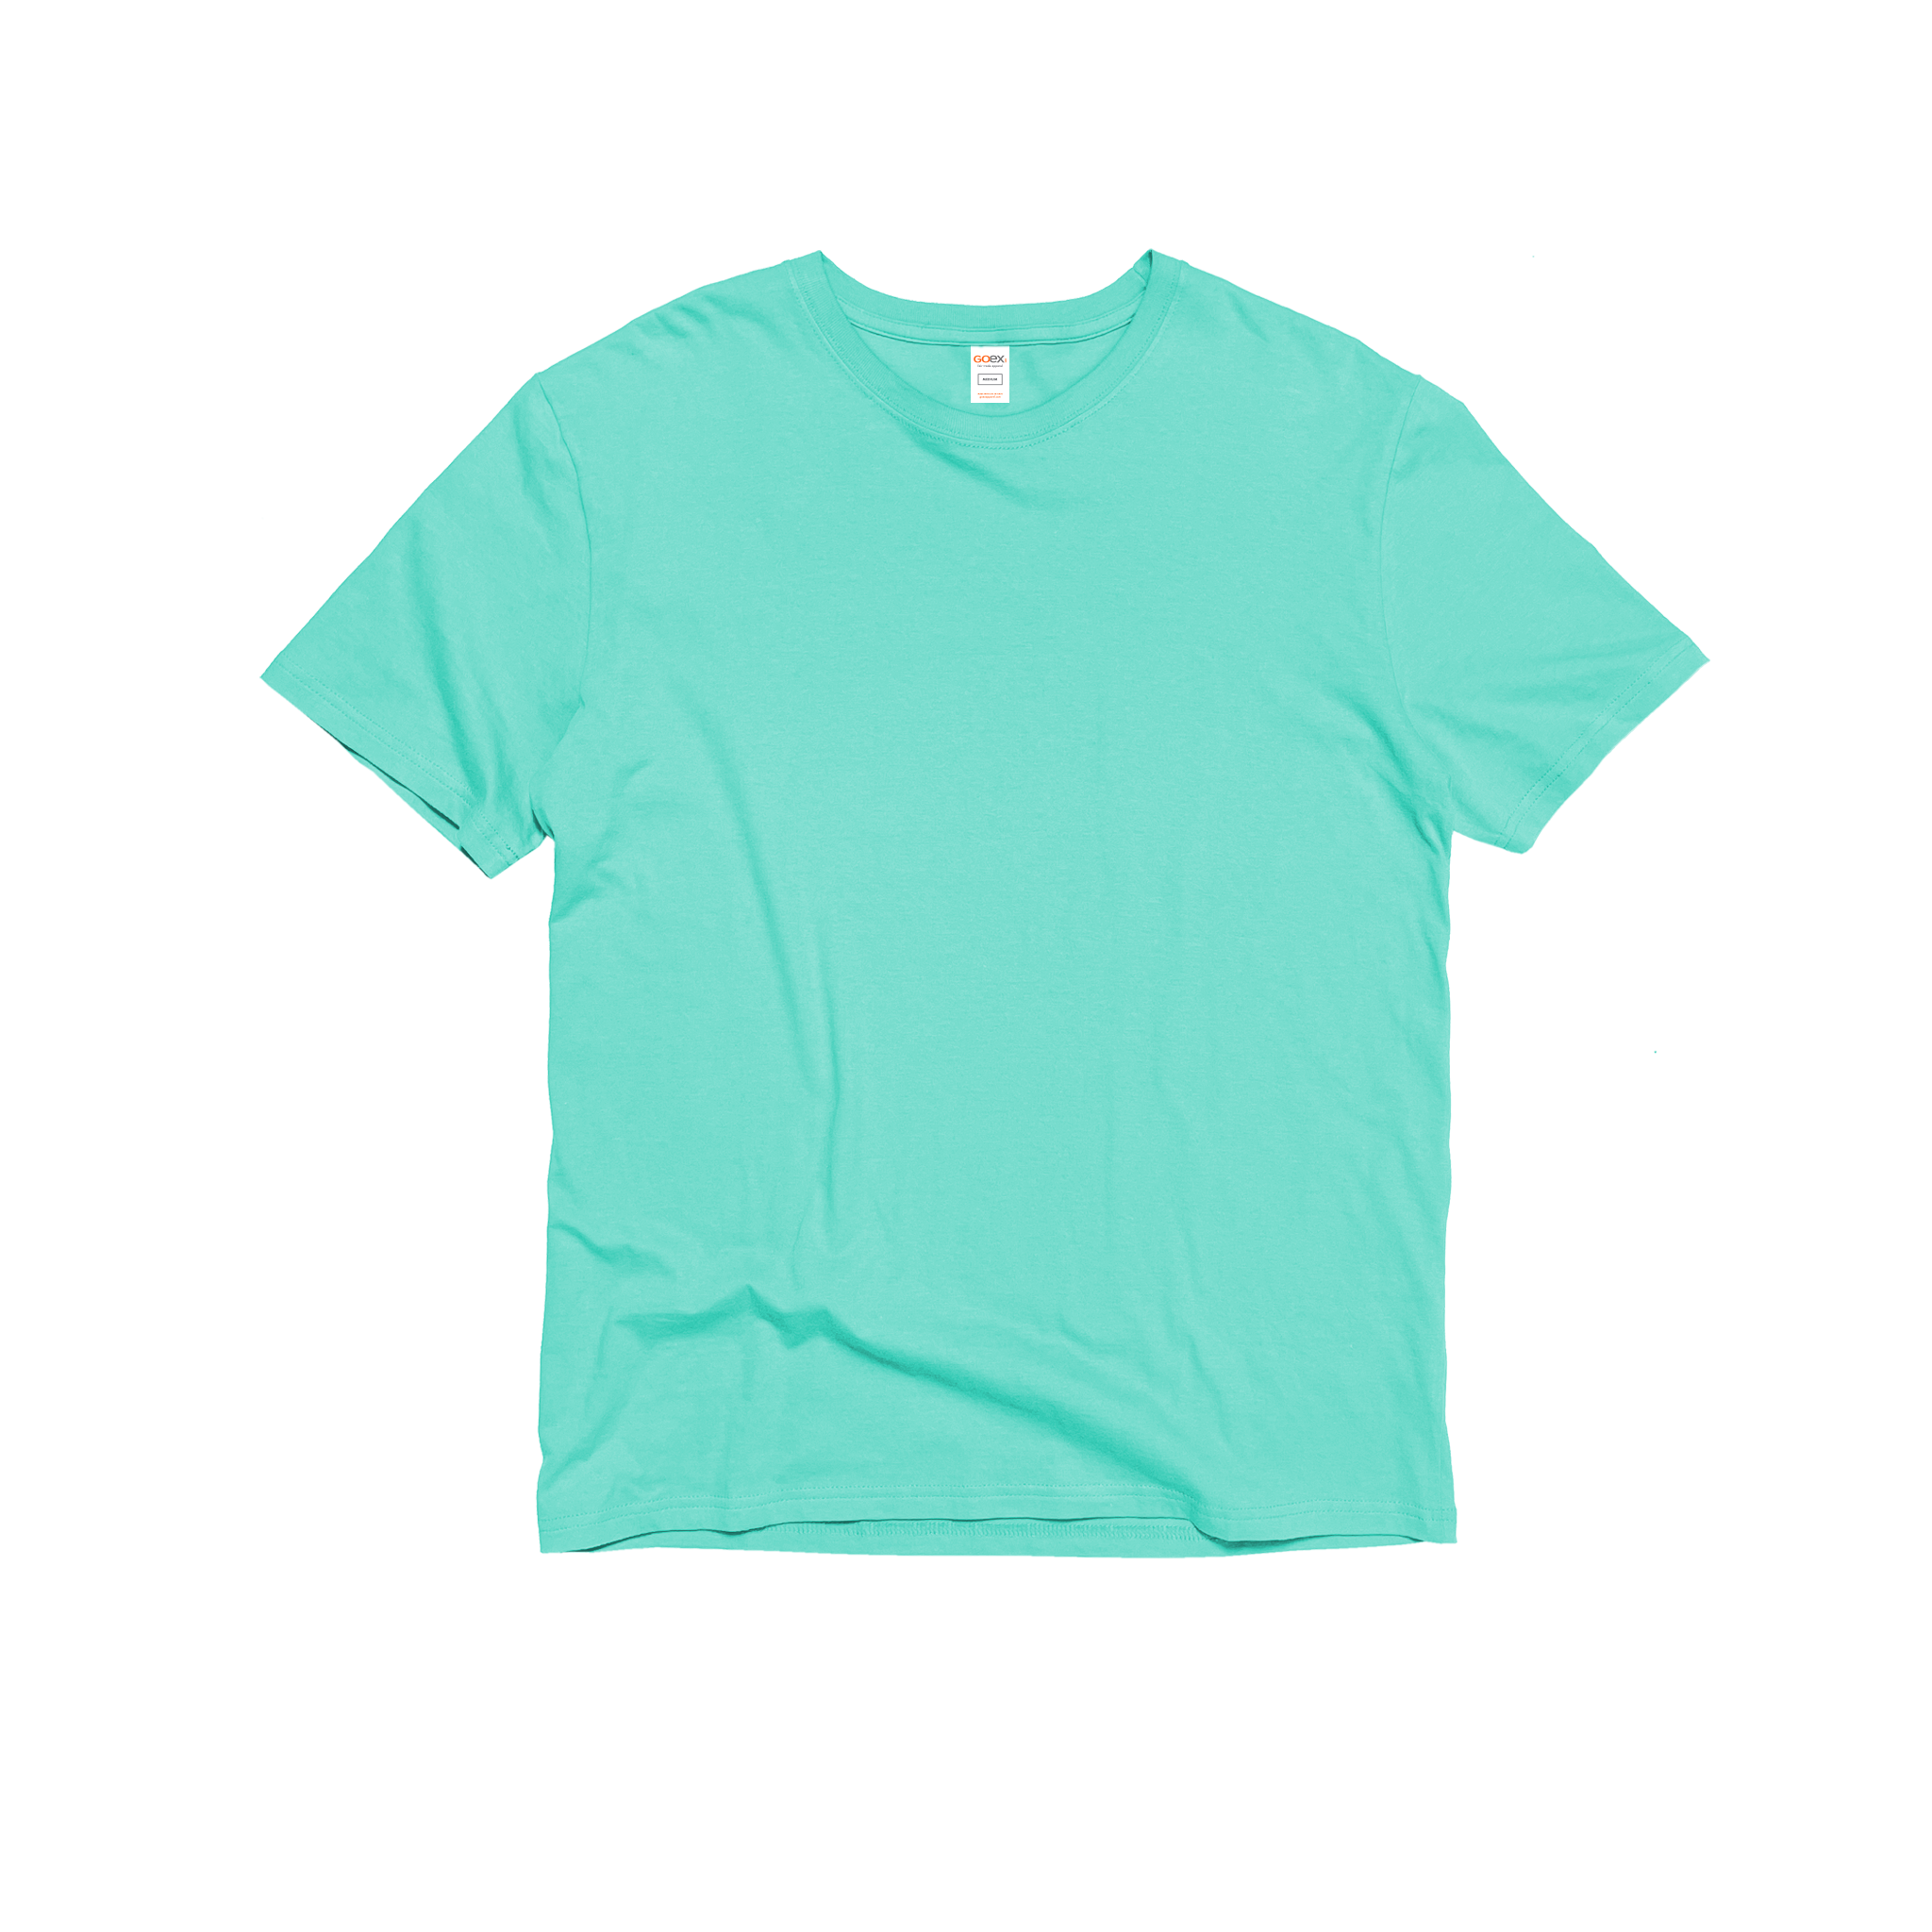 Front Flat Lay of GOEX Unisex and Men's Cotton Tee in Mint